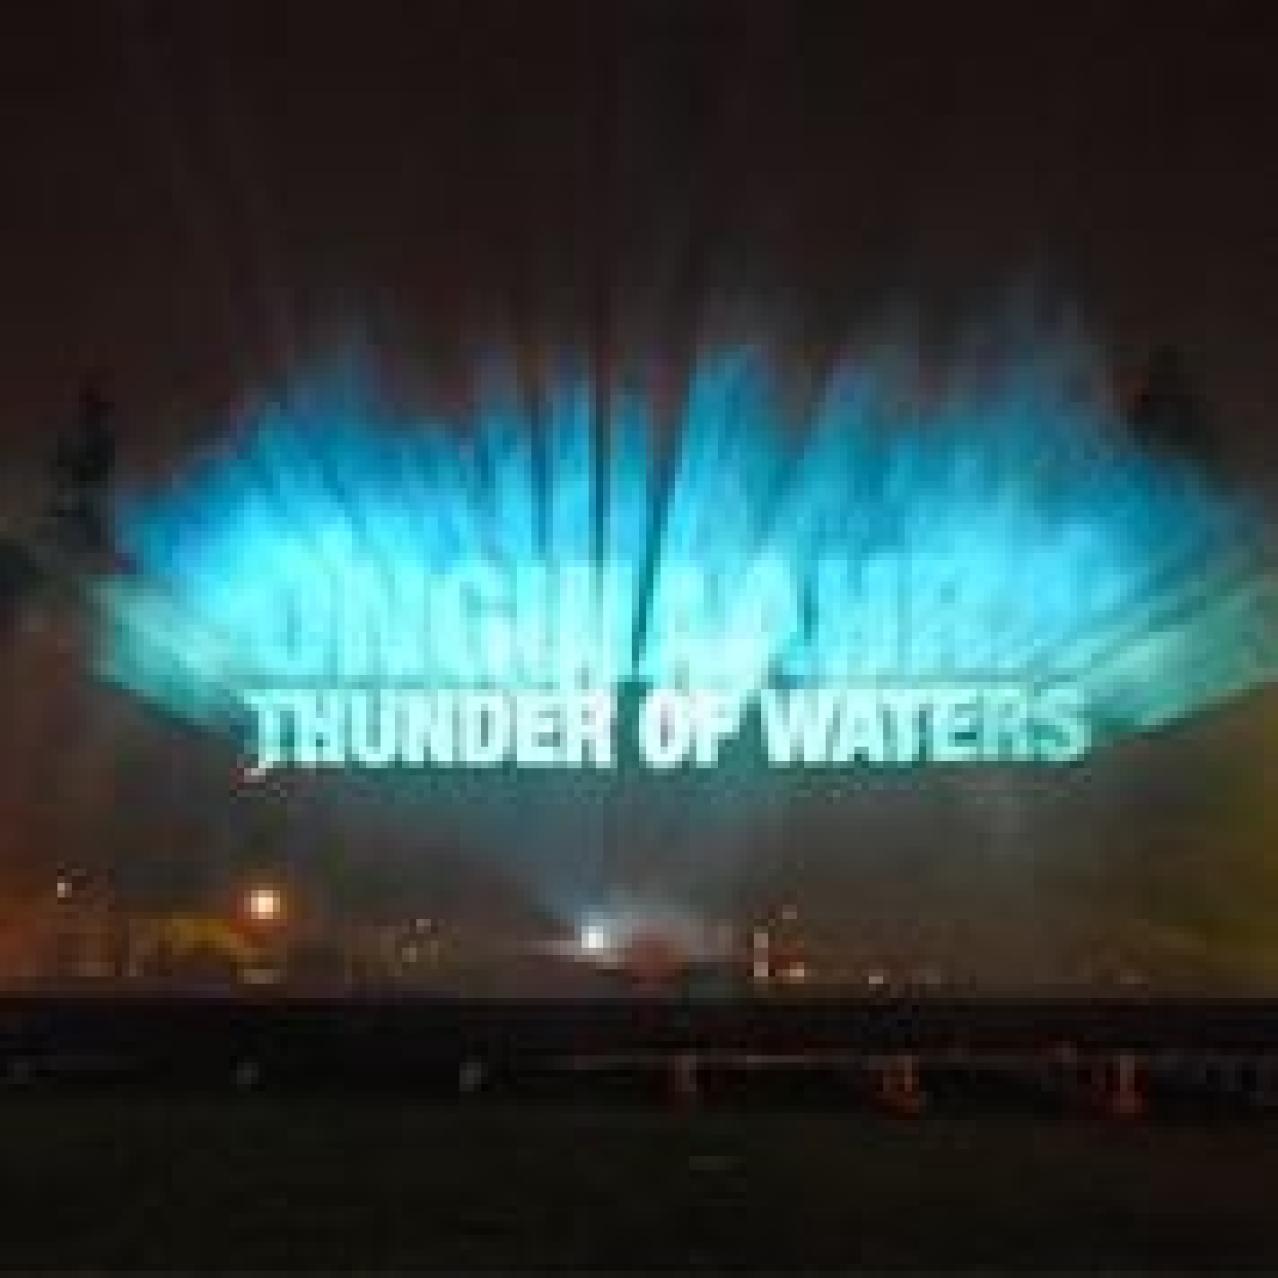 Onguiaahra: Thunder of Waters